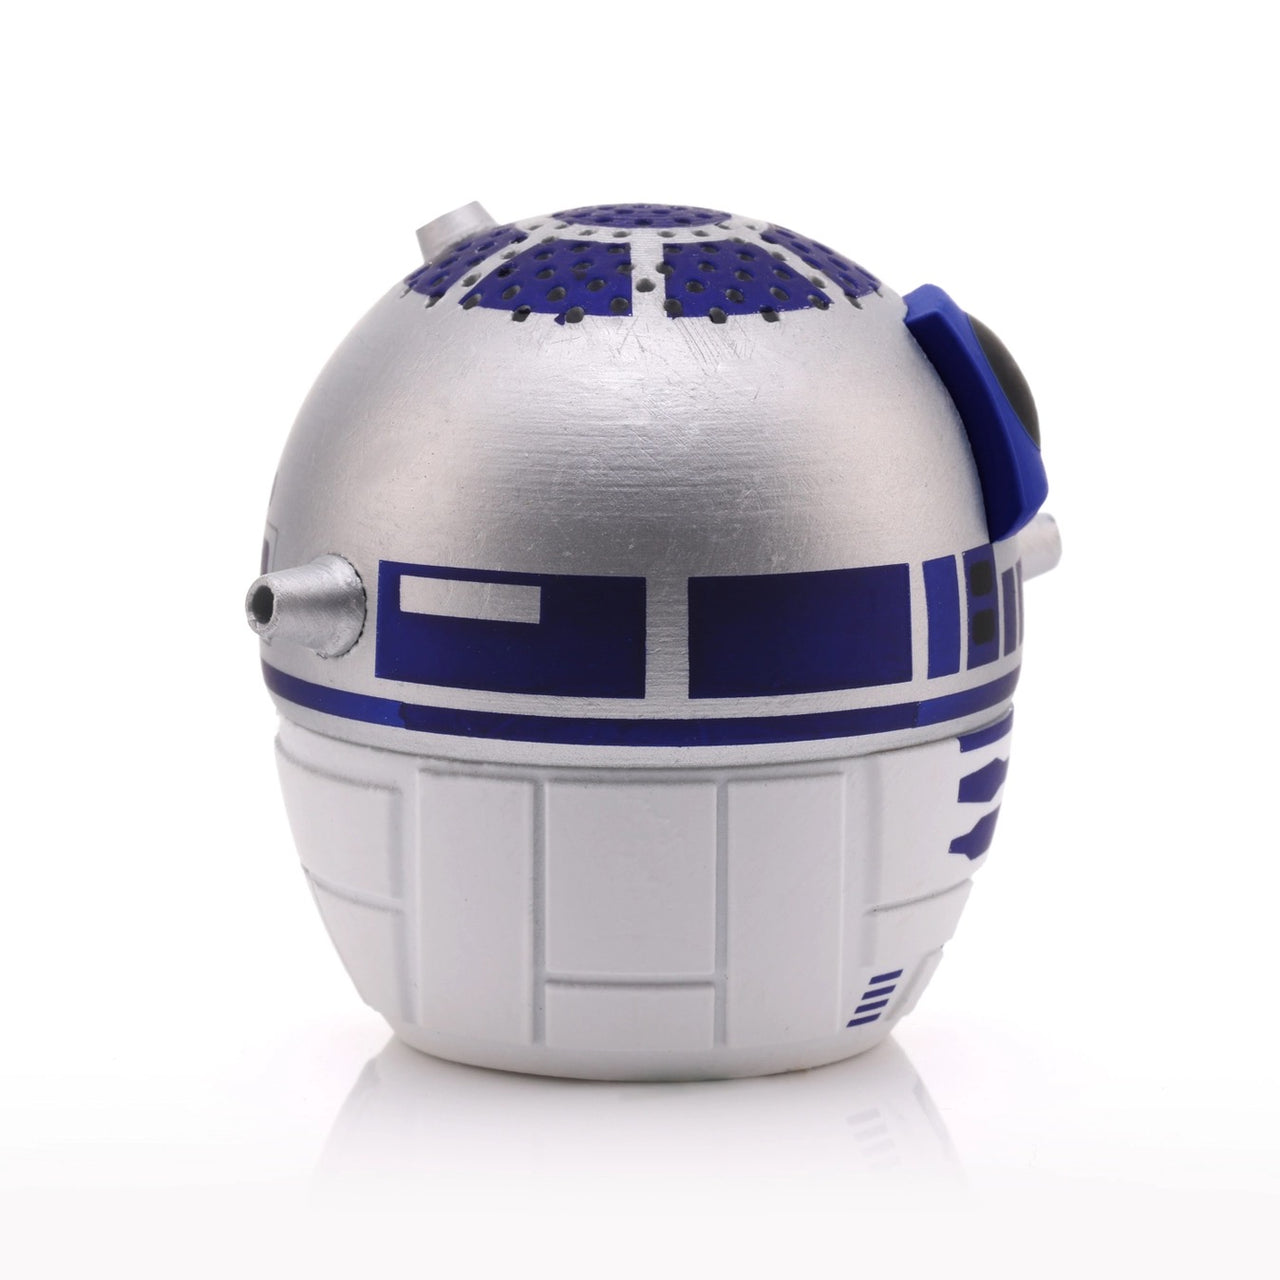 R2D2 - Bitty Boomers Collectable Bluetooth Speaker